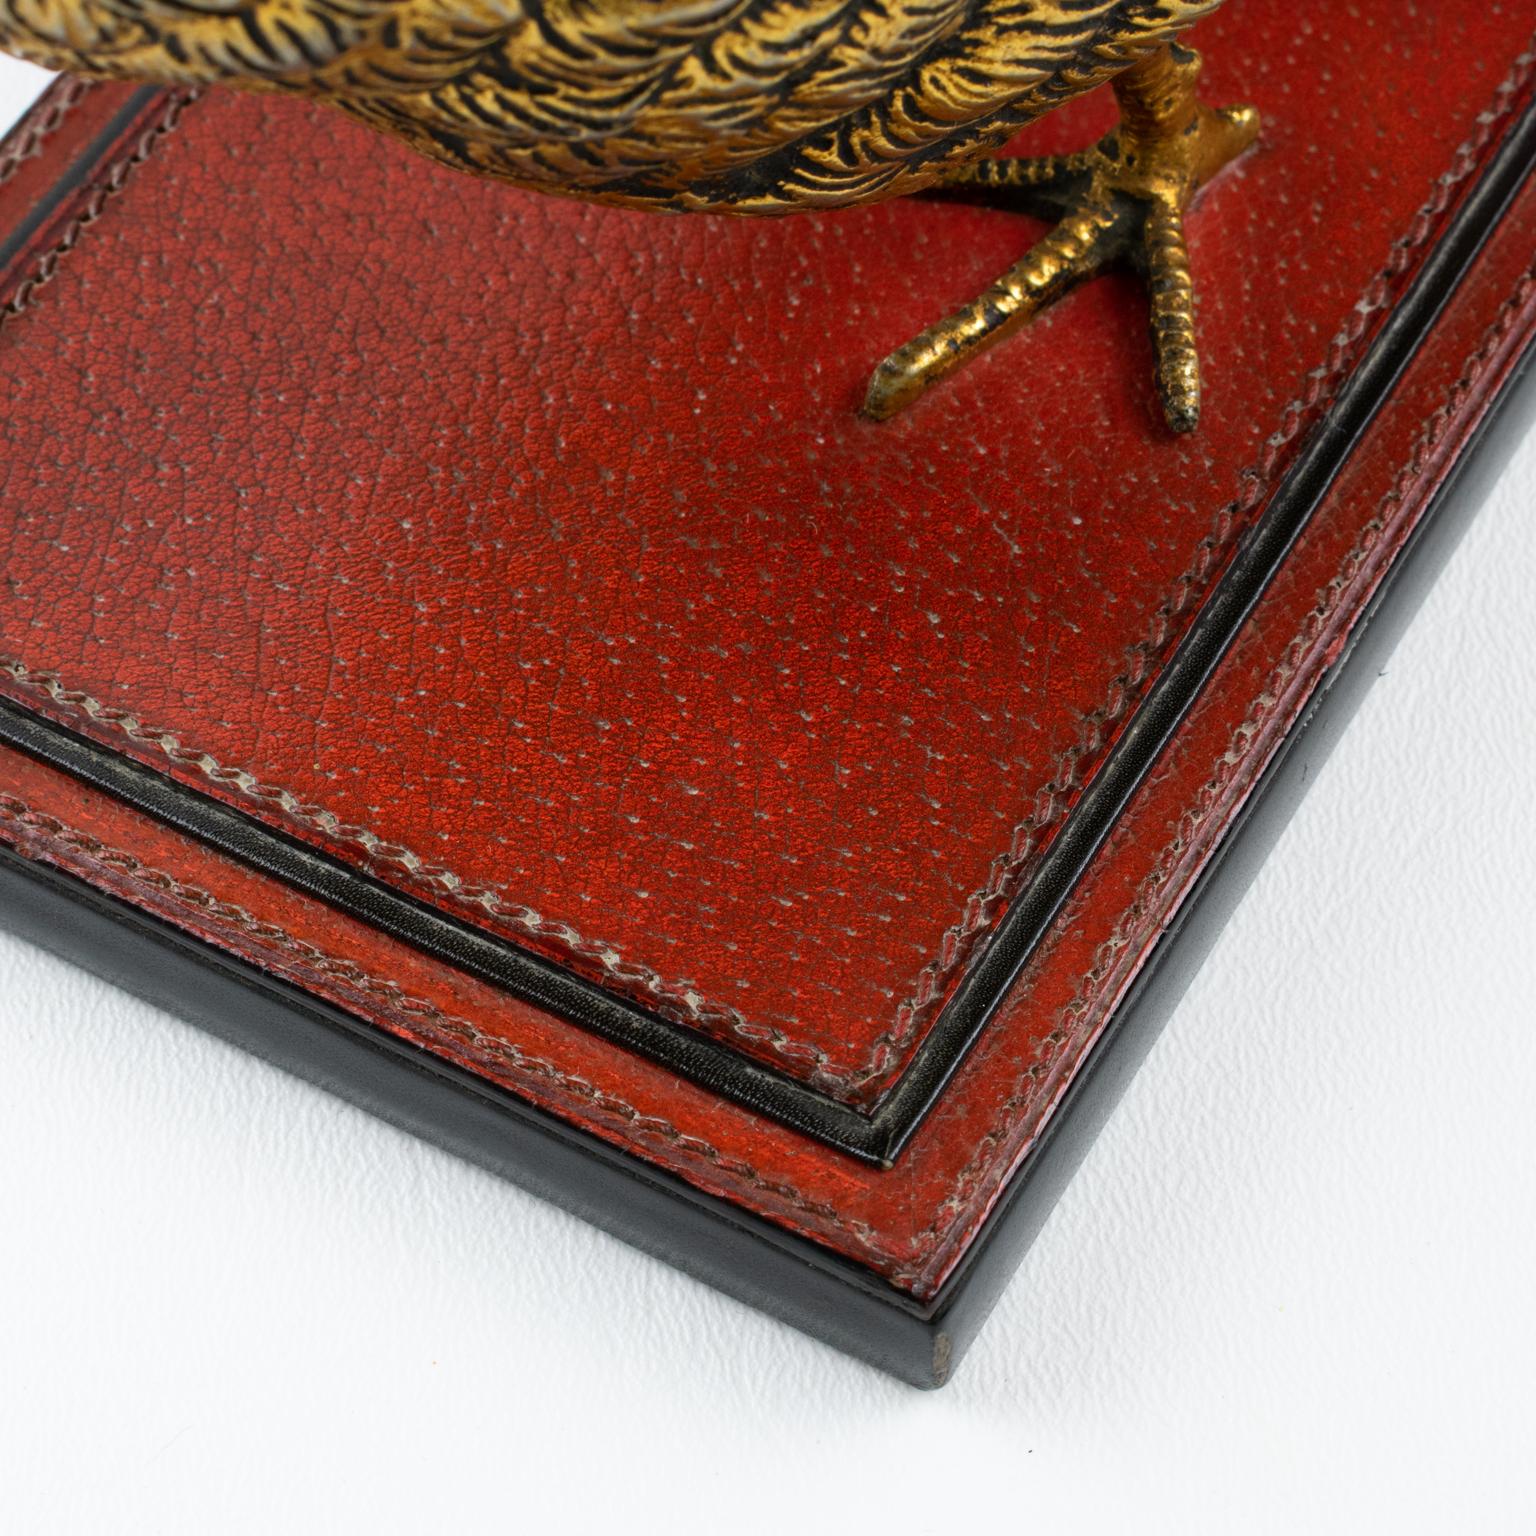 Gucci Italy Hand-Stitched Red Leather Bookends with Gilt Metal Partridges, 1970s For Sale 12